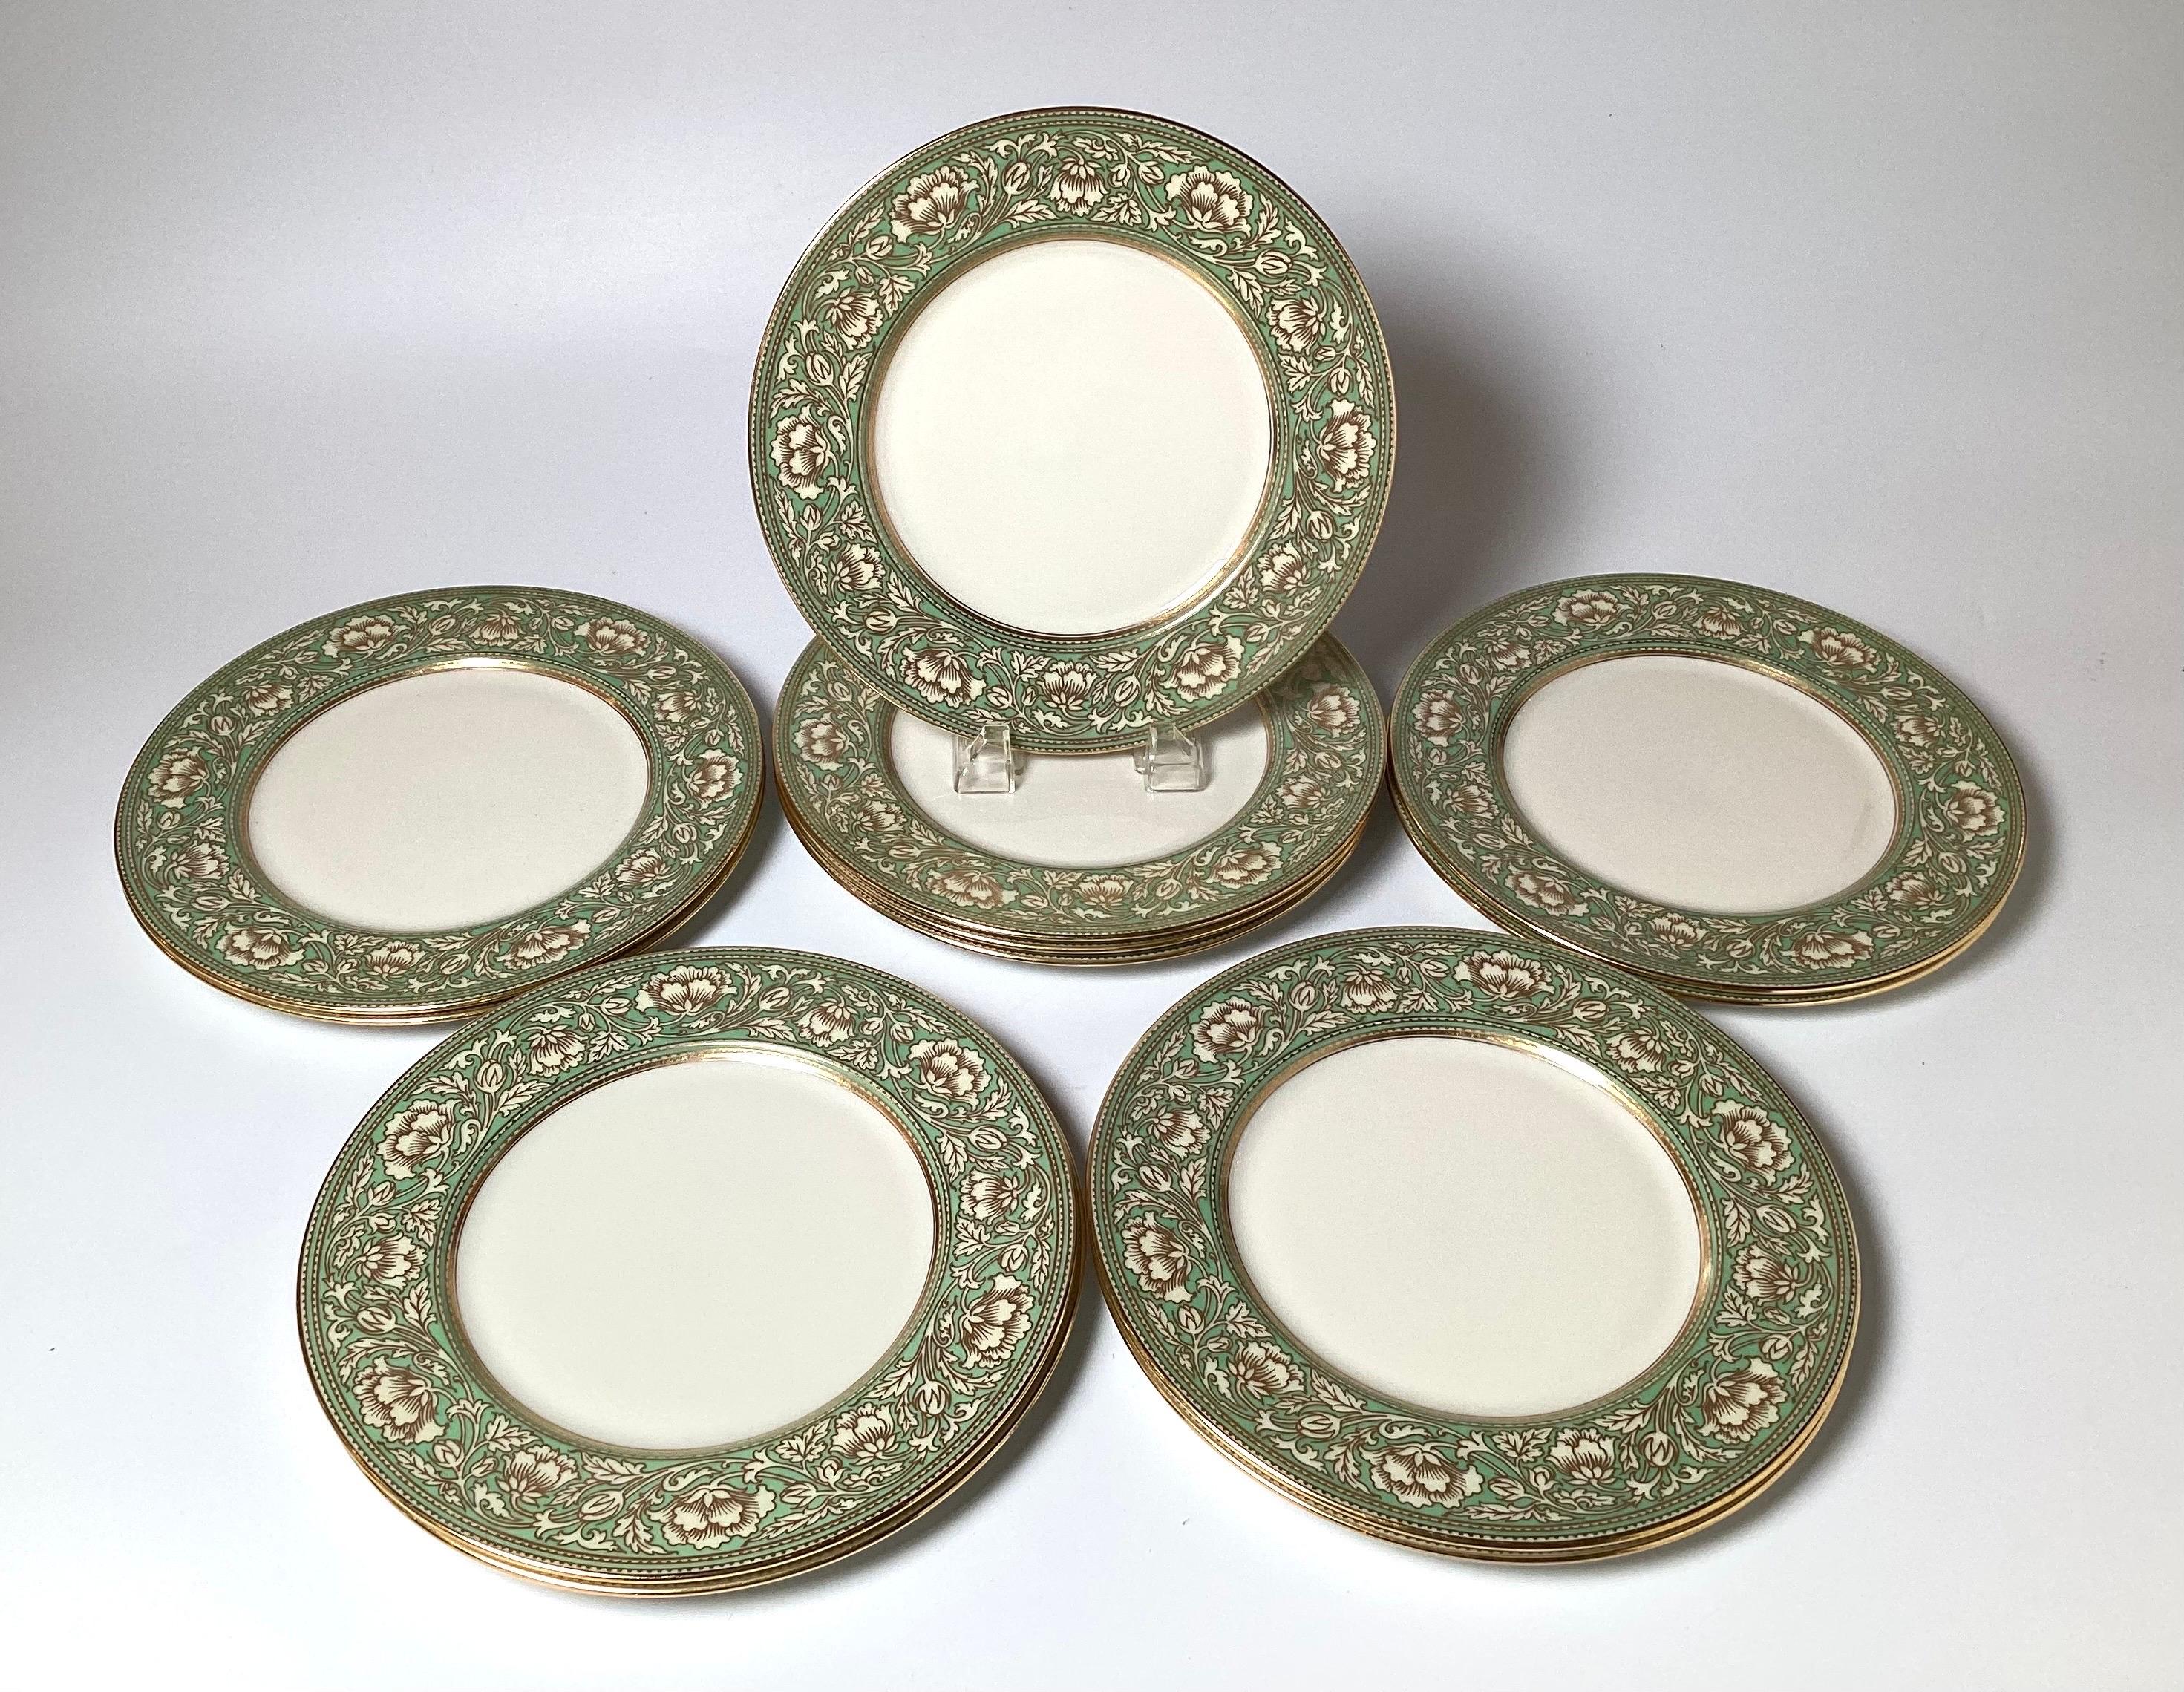 Set of 12 Antique Lenox Green Mark Service Plates 1920's In Excellent Condition For Sale In Lambertville, NJ